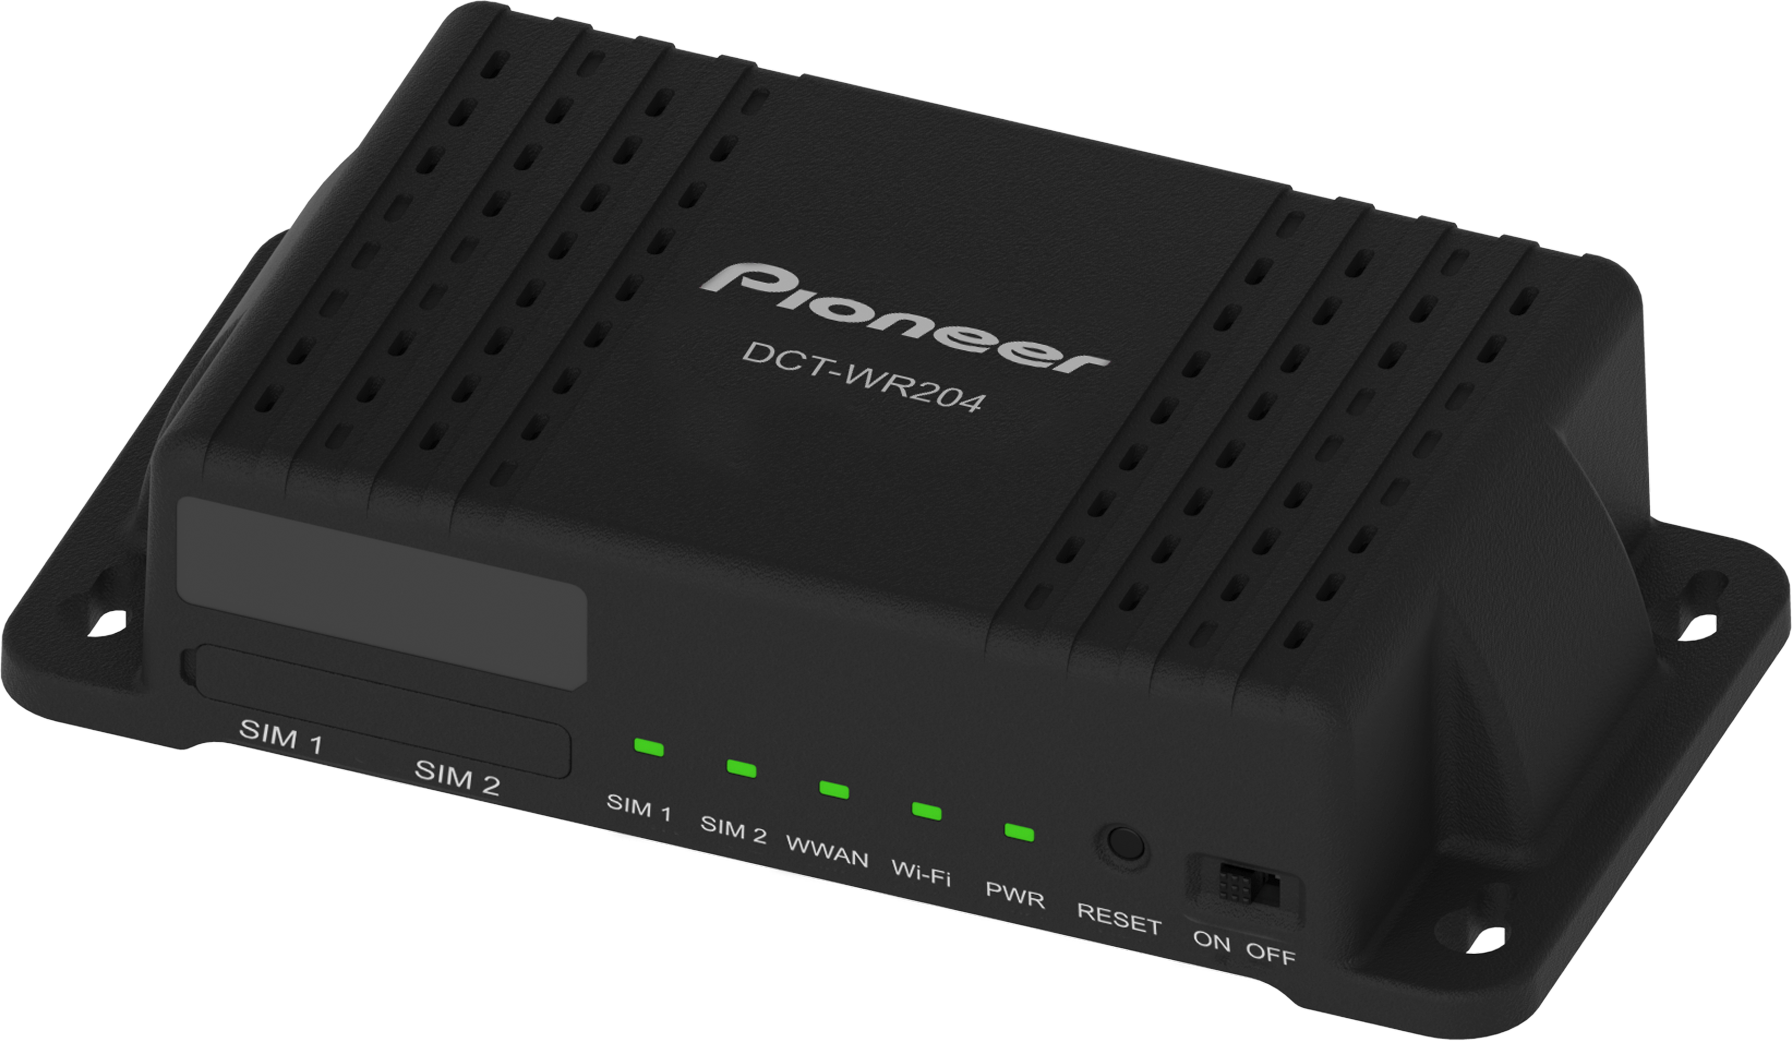 Pioneer DCT-WR204 - Wifi Router mit Repeater Funktion und kompakter Antenne